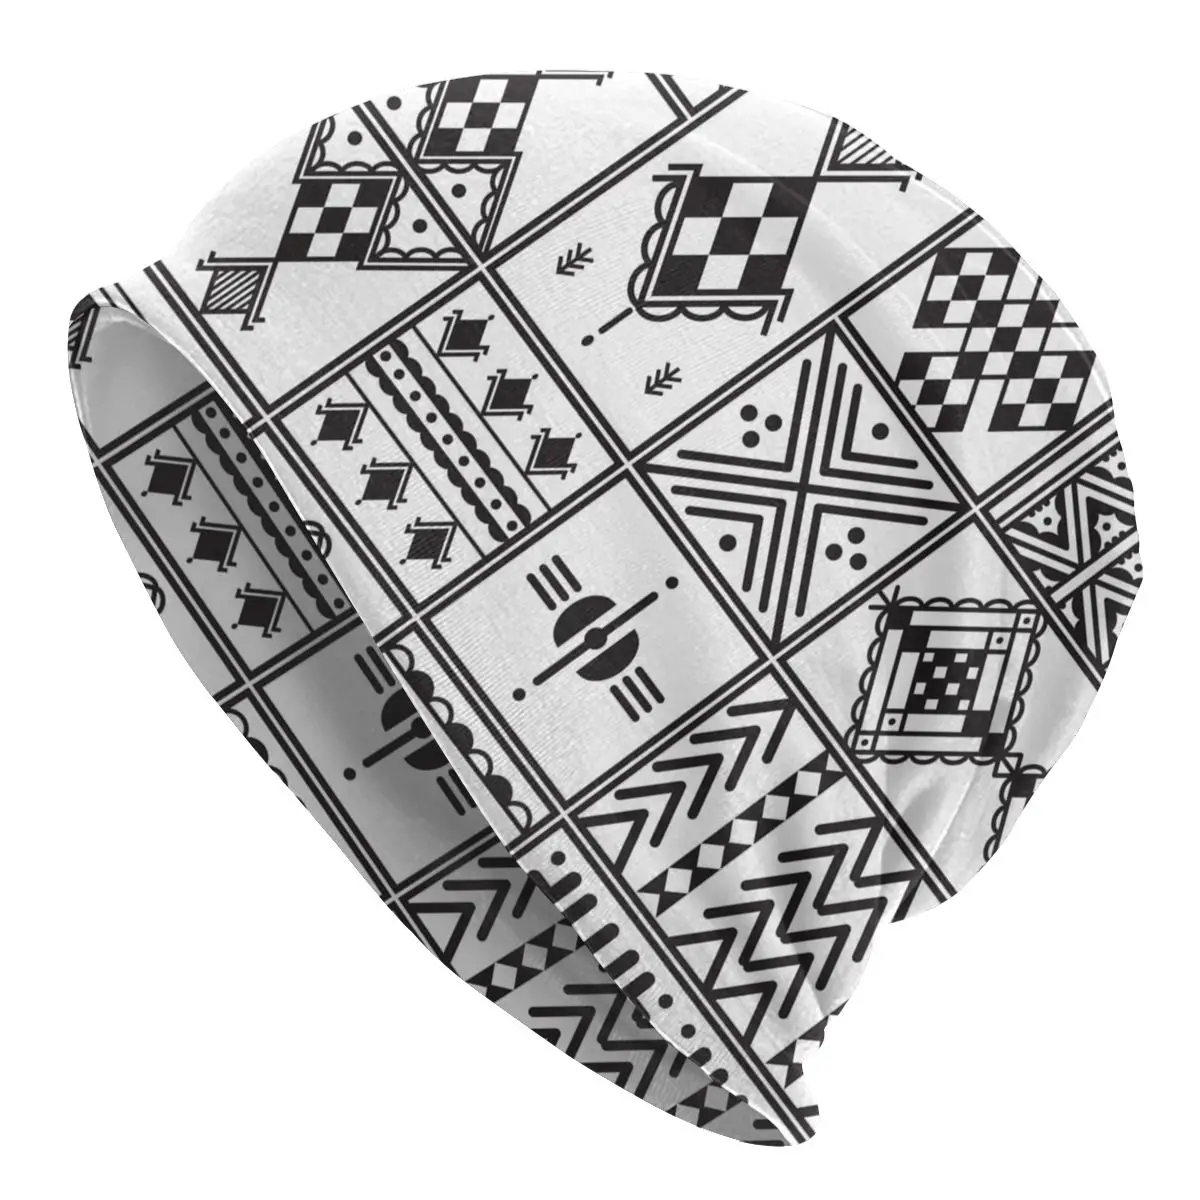 

Kabyle Amazigh Motif Graphic Slouchy Beanie Hat Women Men Geometry Ethnic Berber Knitted Skullies Beanies Cap for Outdoor Ski